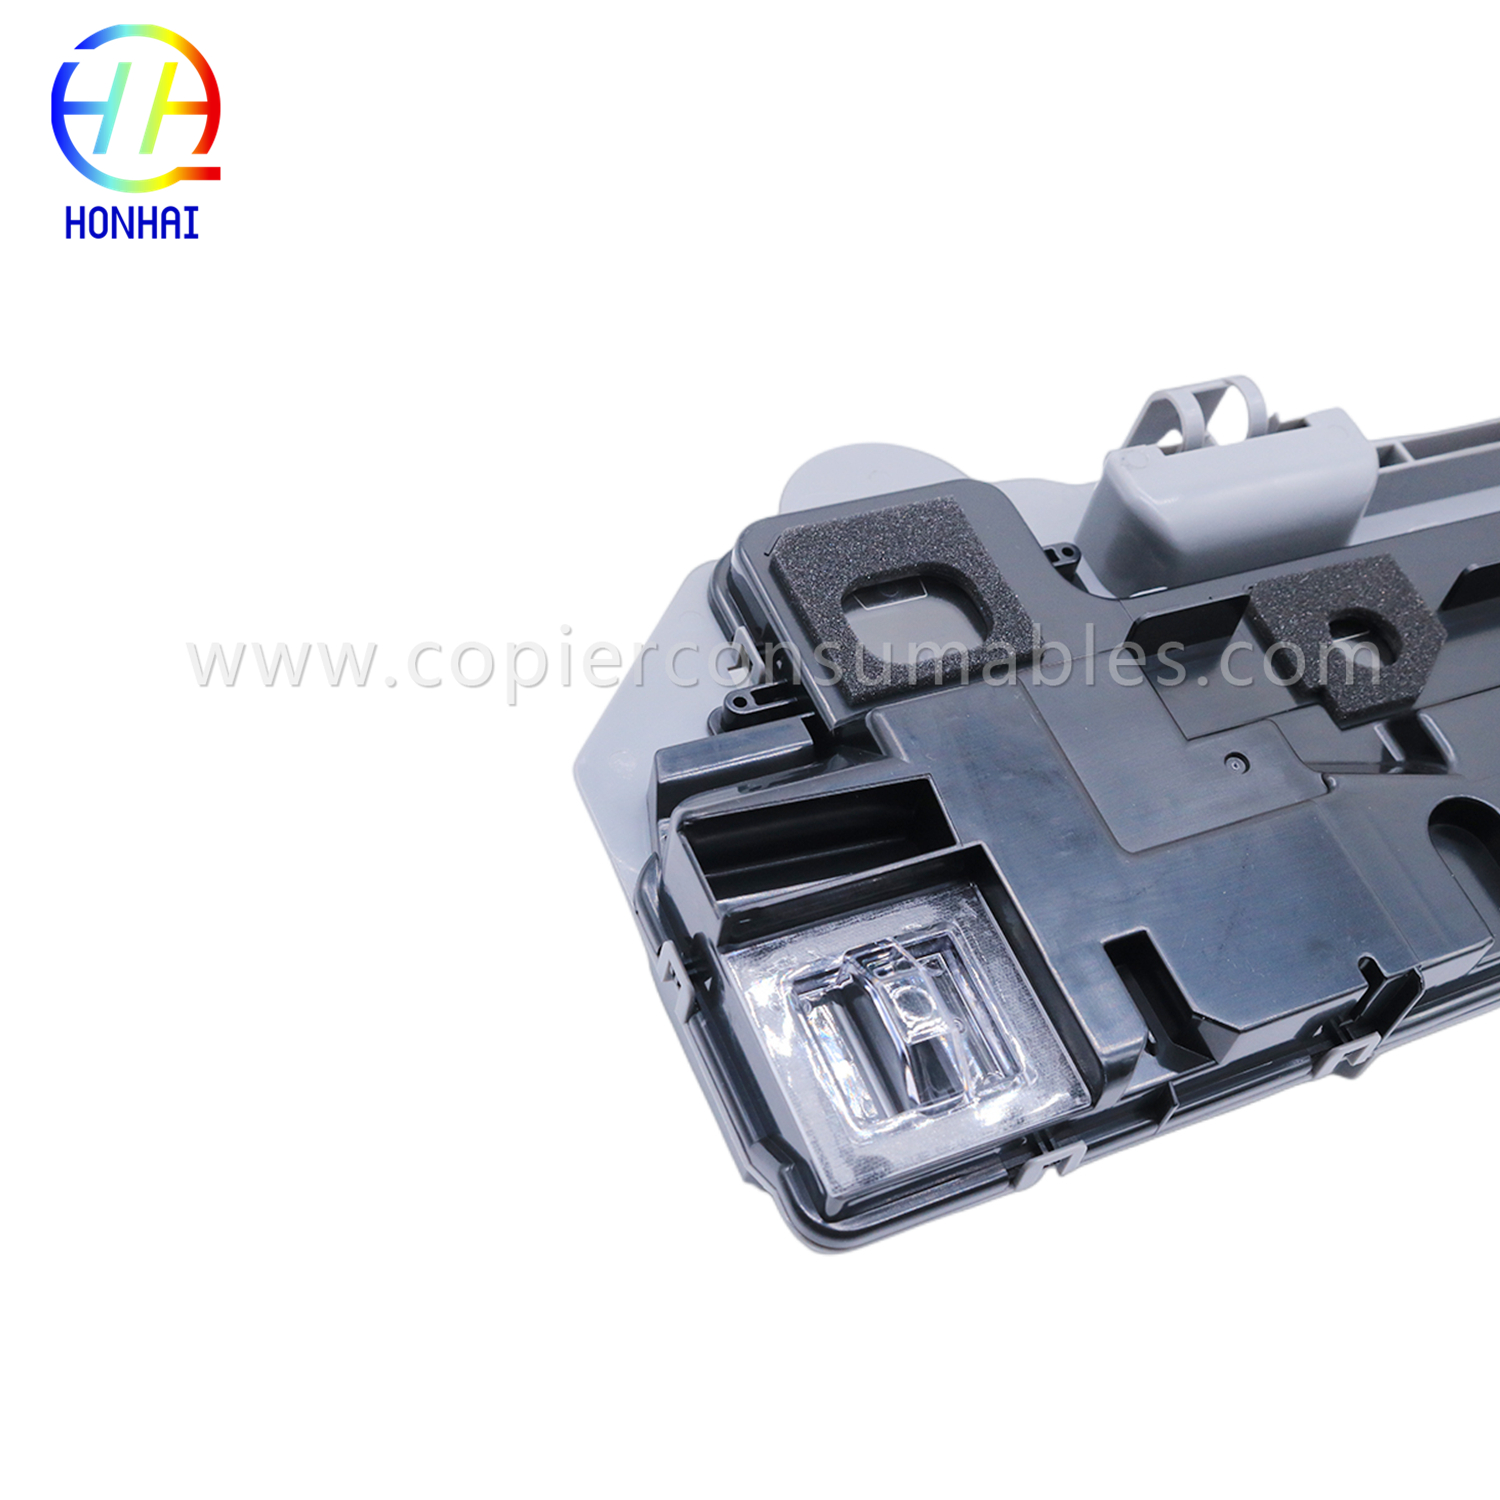 Waste Toner Container for Xerox Sc2020 Sc2021 2020 2021 (CWAA0869)  (2)